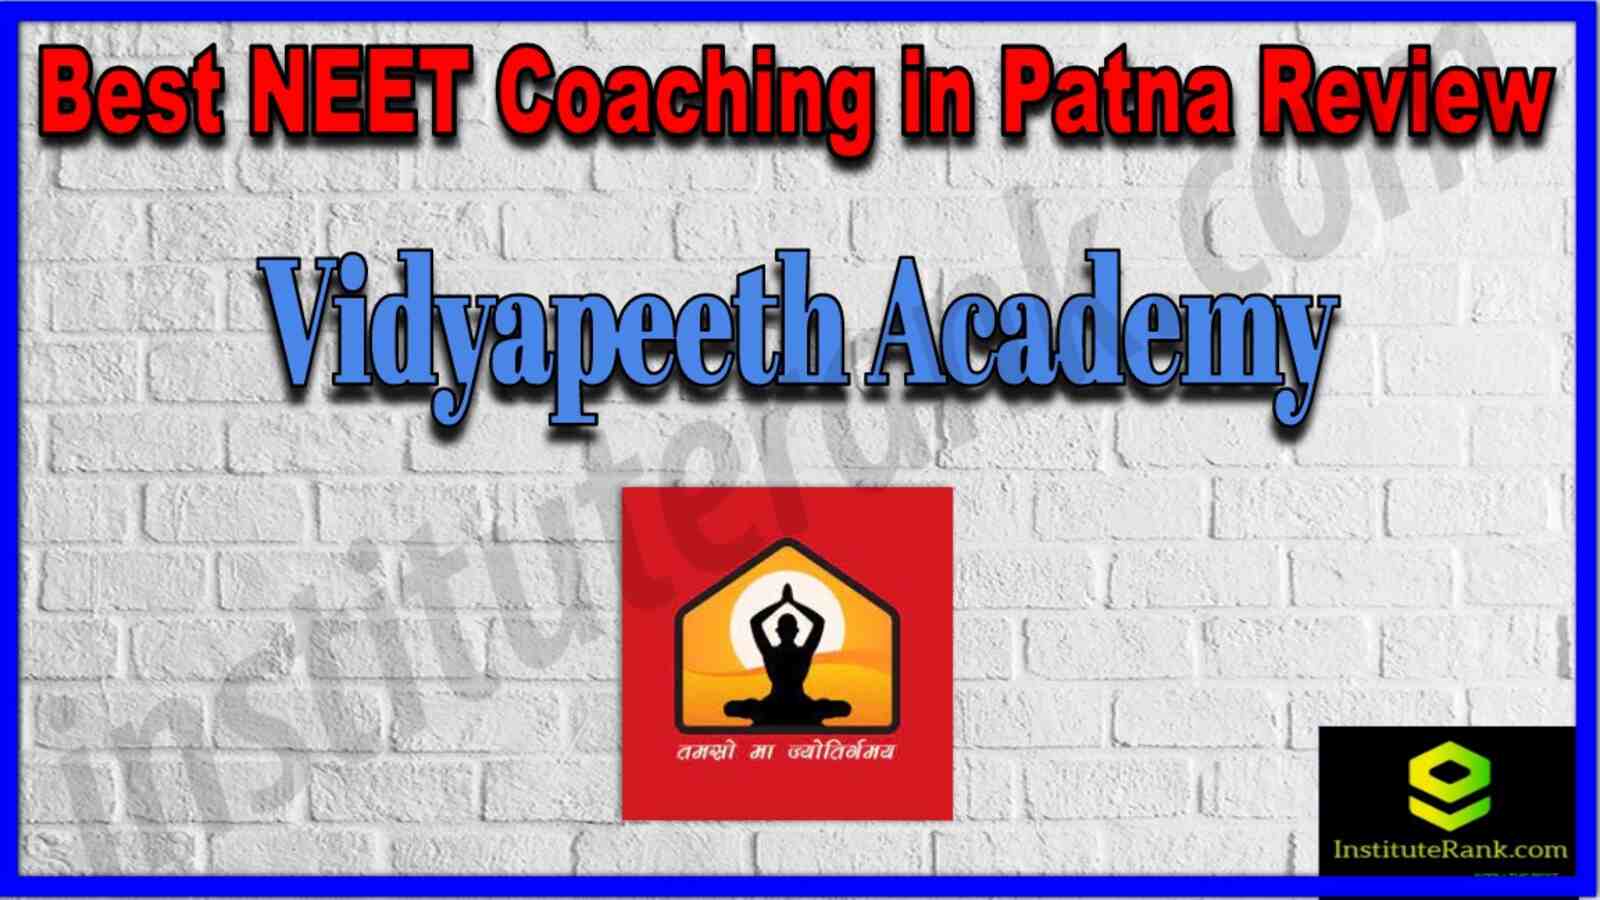 Vidyapeeth Academy in Patna Review